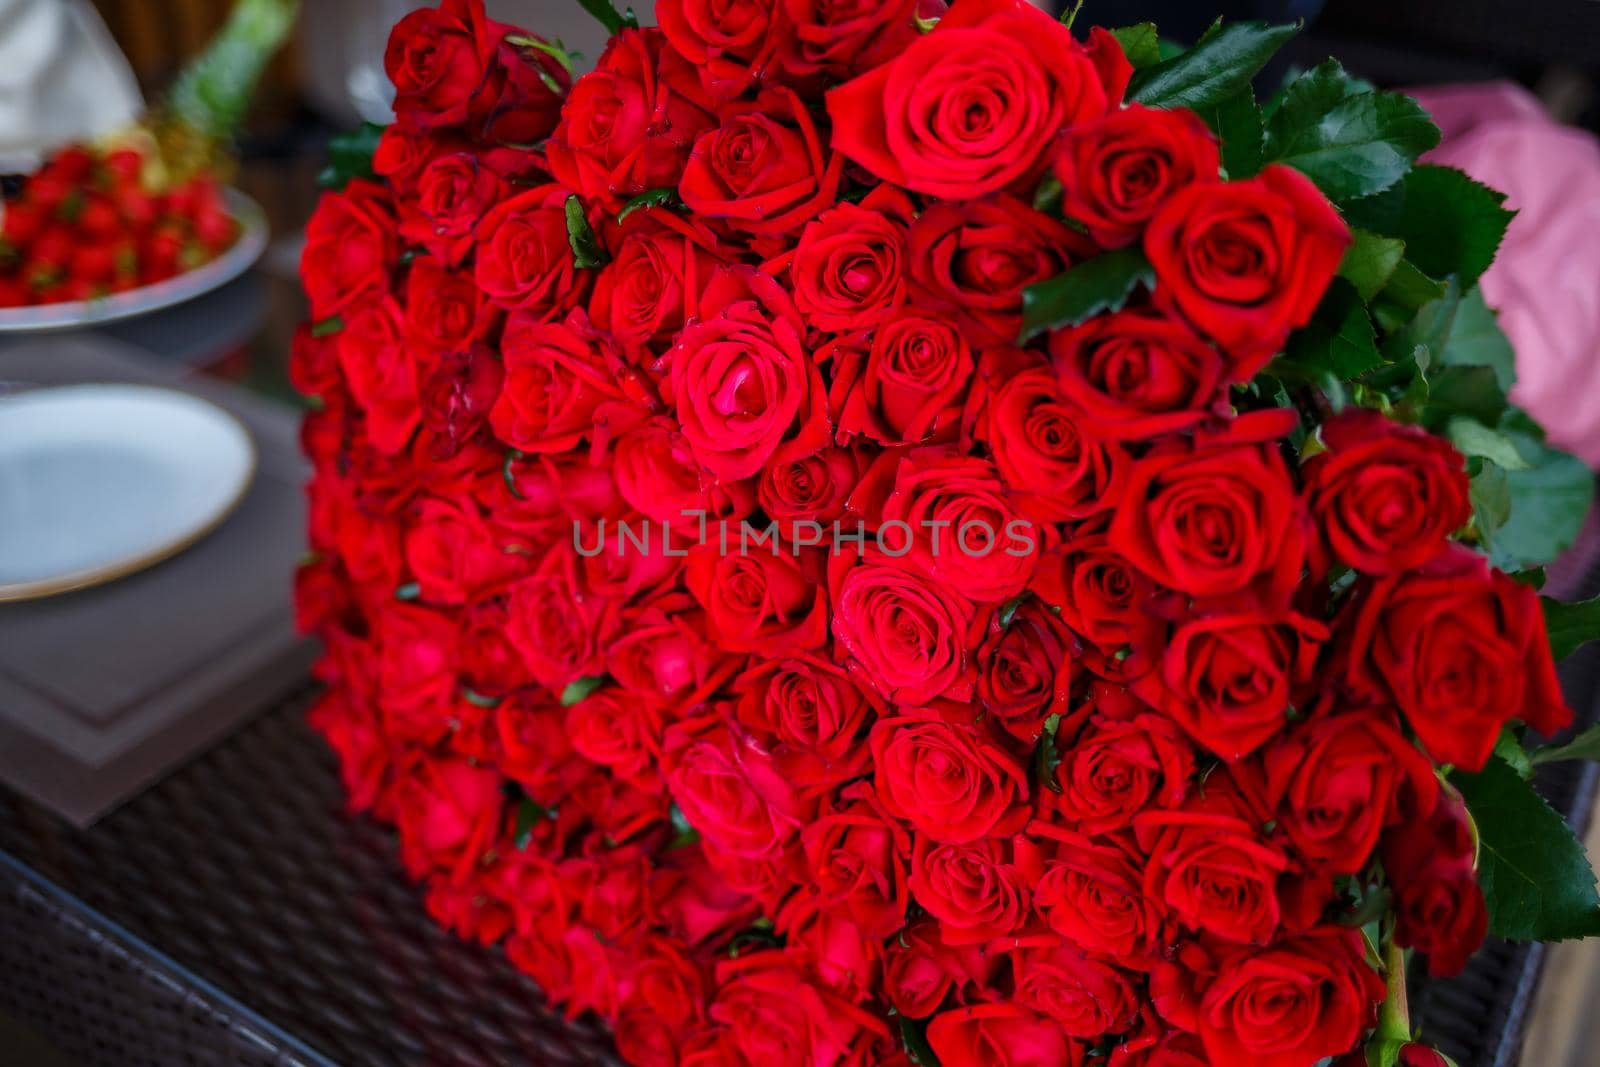 A large bouquet of red roses for a girl, fresh flowers by Dmitrytph